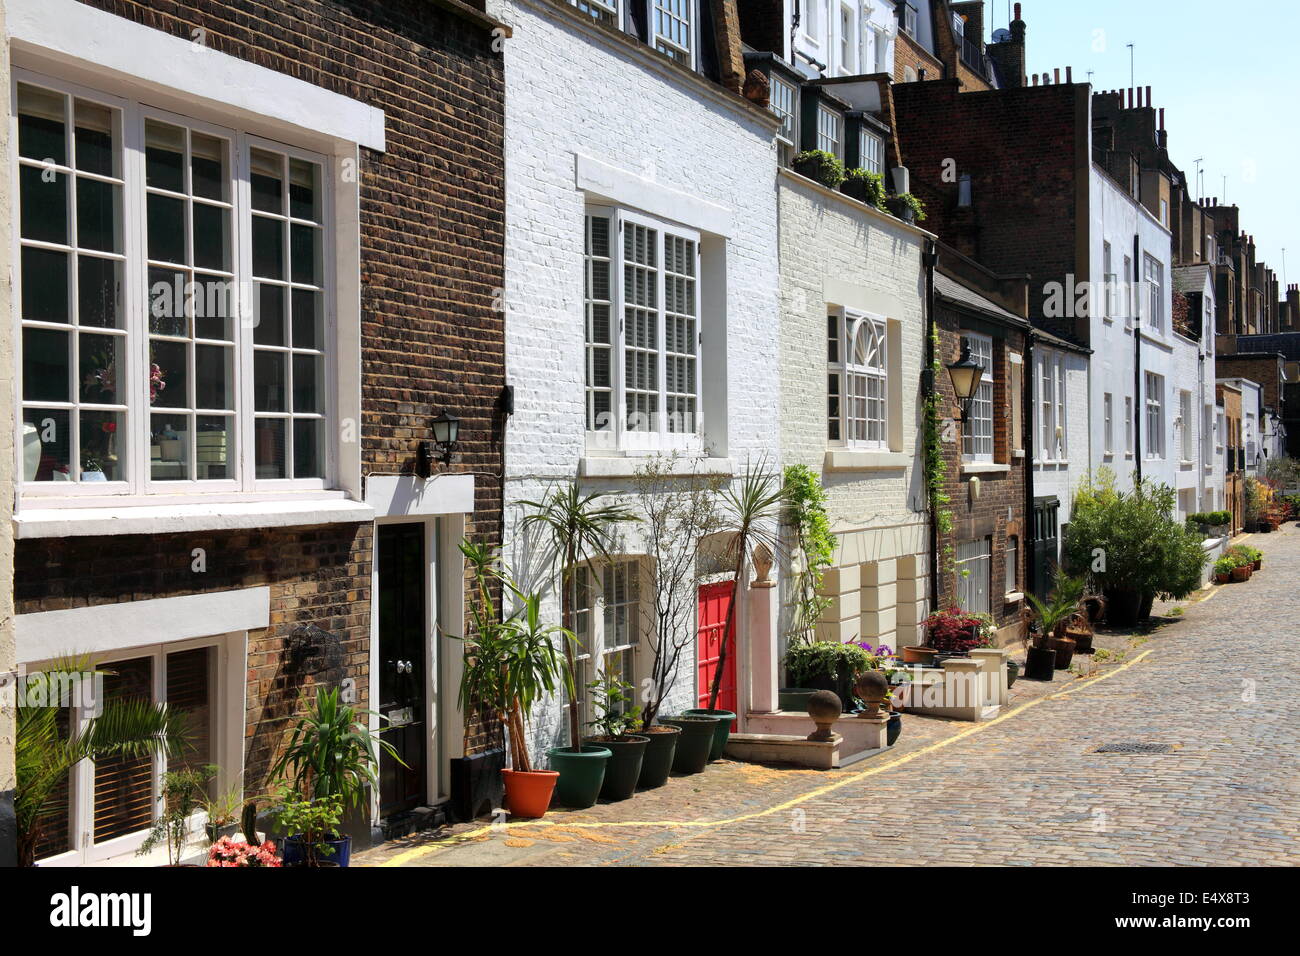 Elegant London mews houses in Marylebone, Westminster, London, England, converted from old horse stables Stock Photo